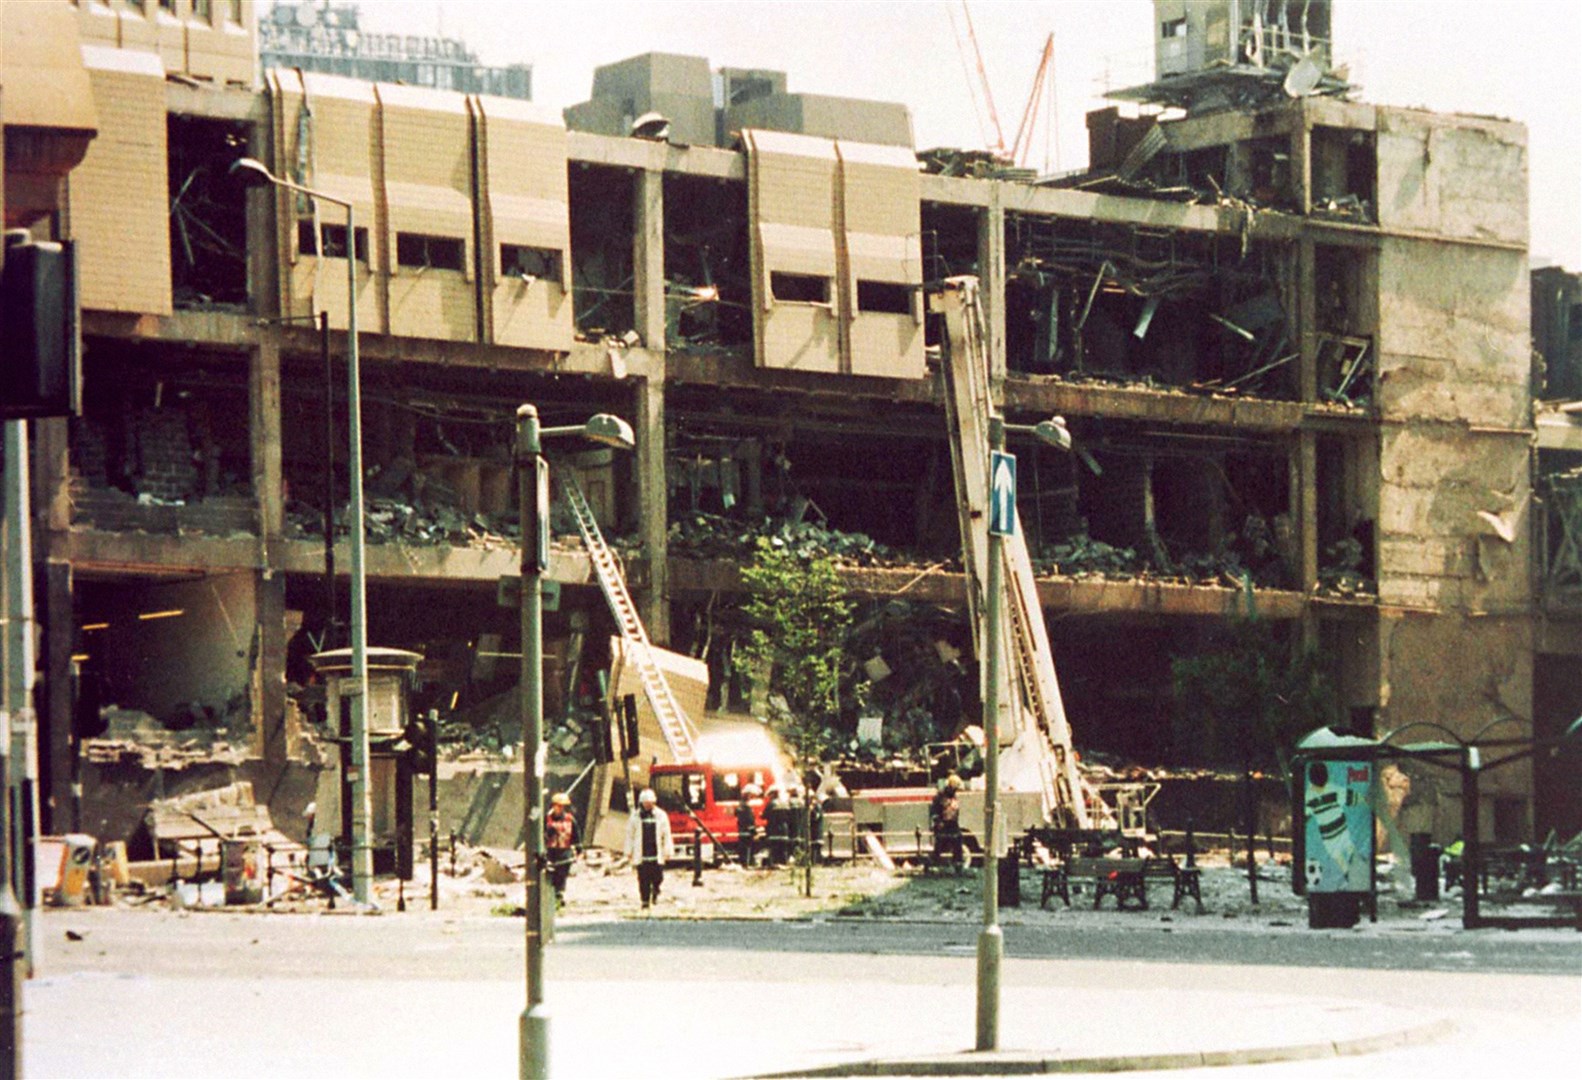 The Arndale shopping centre in Manchester was bombed in June 1996 (PA)